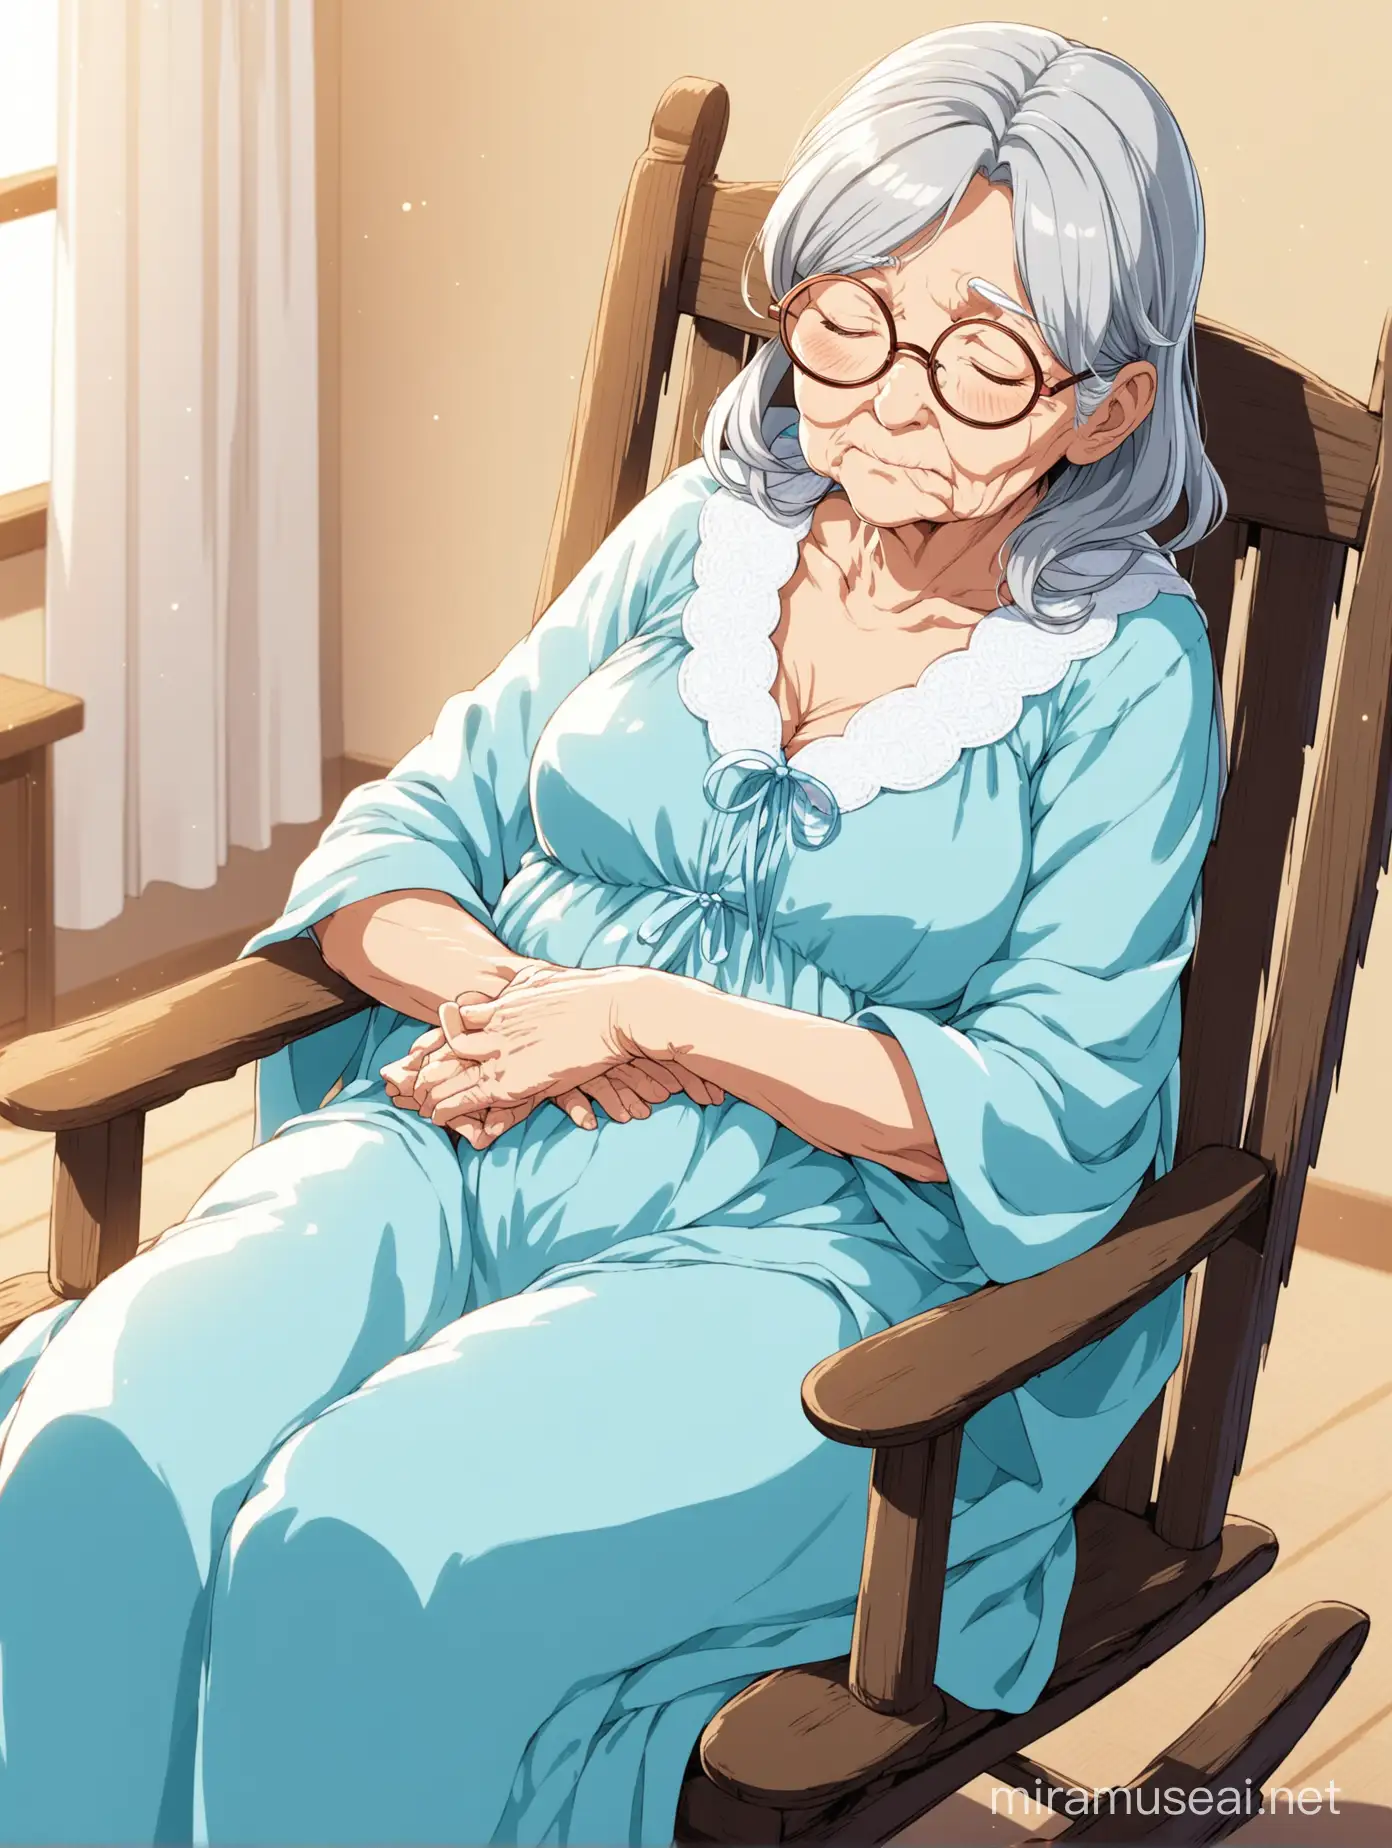 Anime, Old lady, wrinkled, with long gray hair, wearing light blue nightgown, white shawl, round glasses, sitting on rocking chair, sleeping.